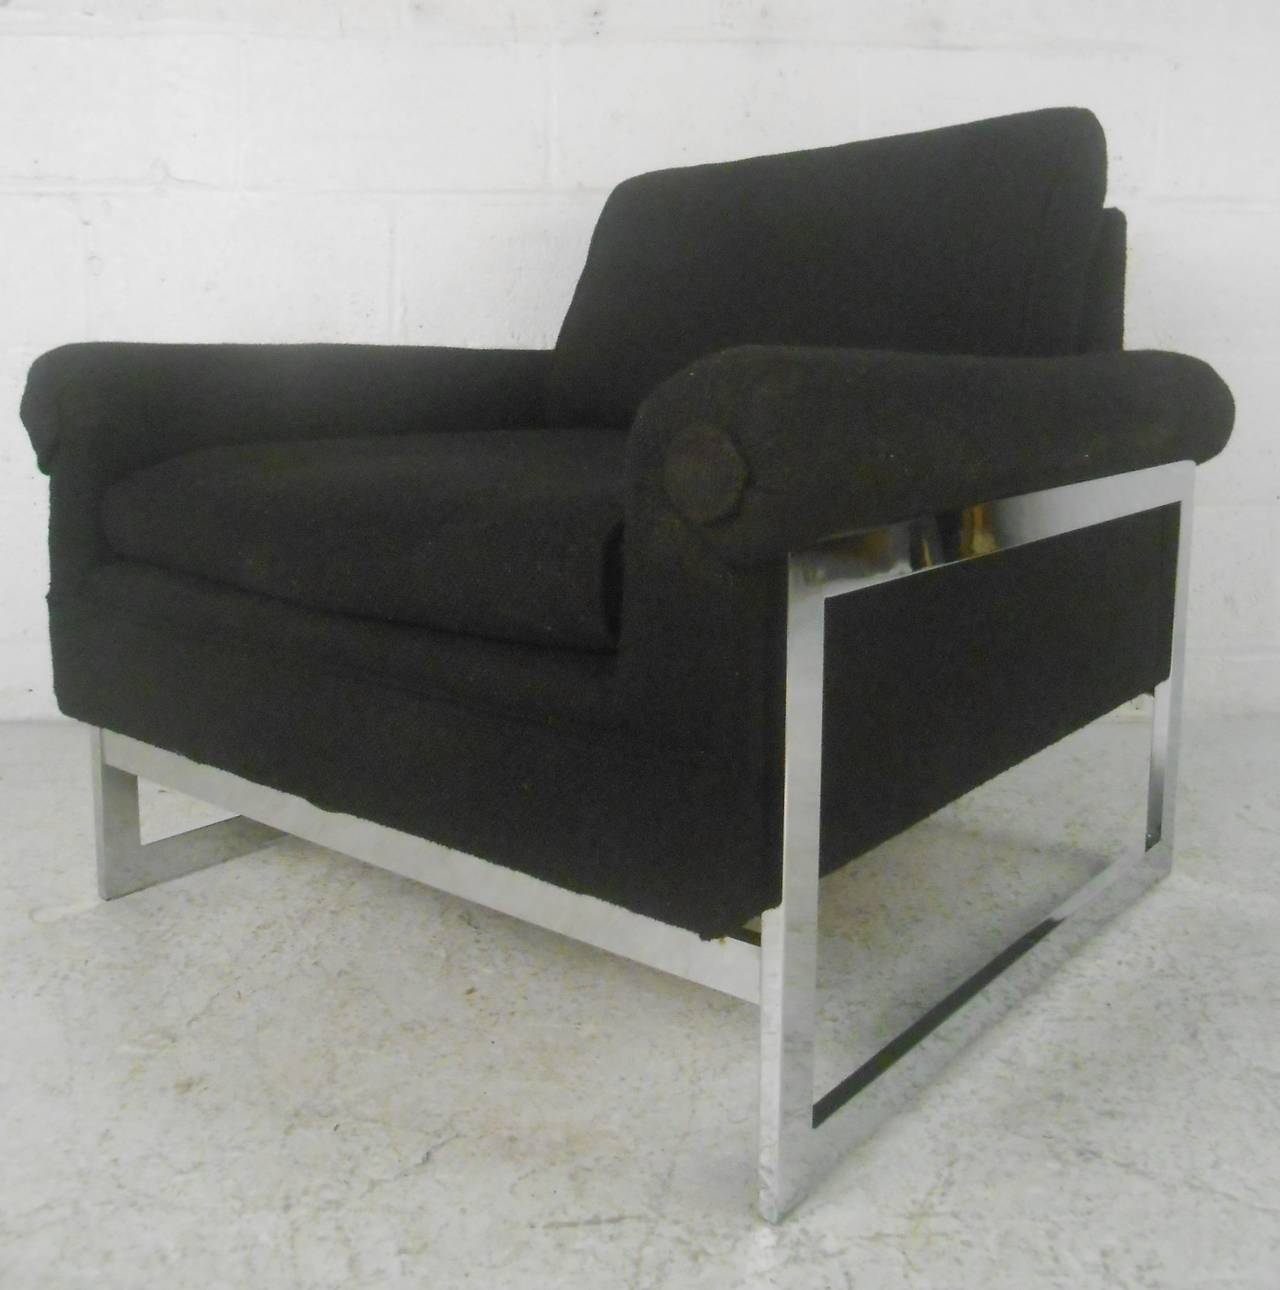 This unique mid-century lounge chair features a plush comfortable design, cubist modern chrome frame, and stylish scrolled arms. Impressive vintage modern chair for any interior. Please confirm item location (NY or NJ) with dealer.